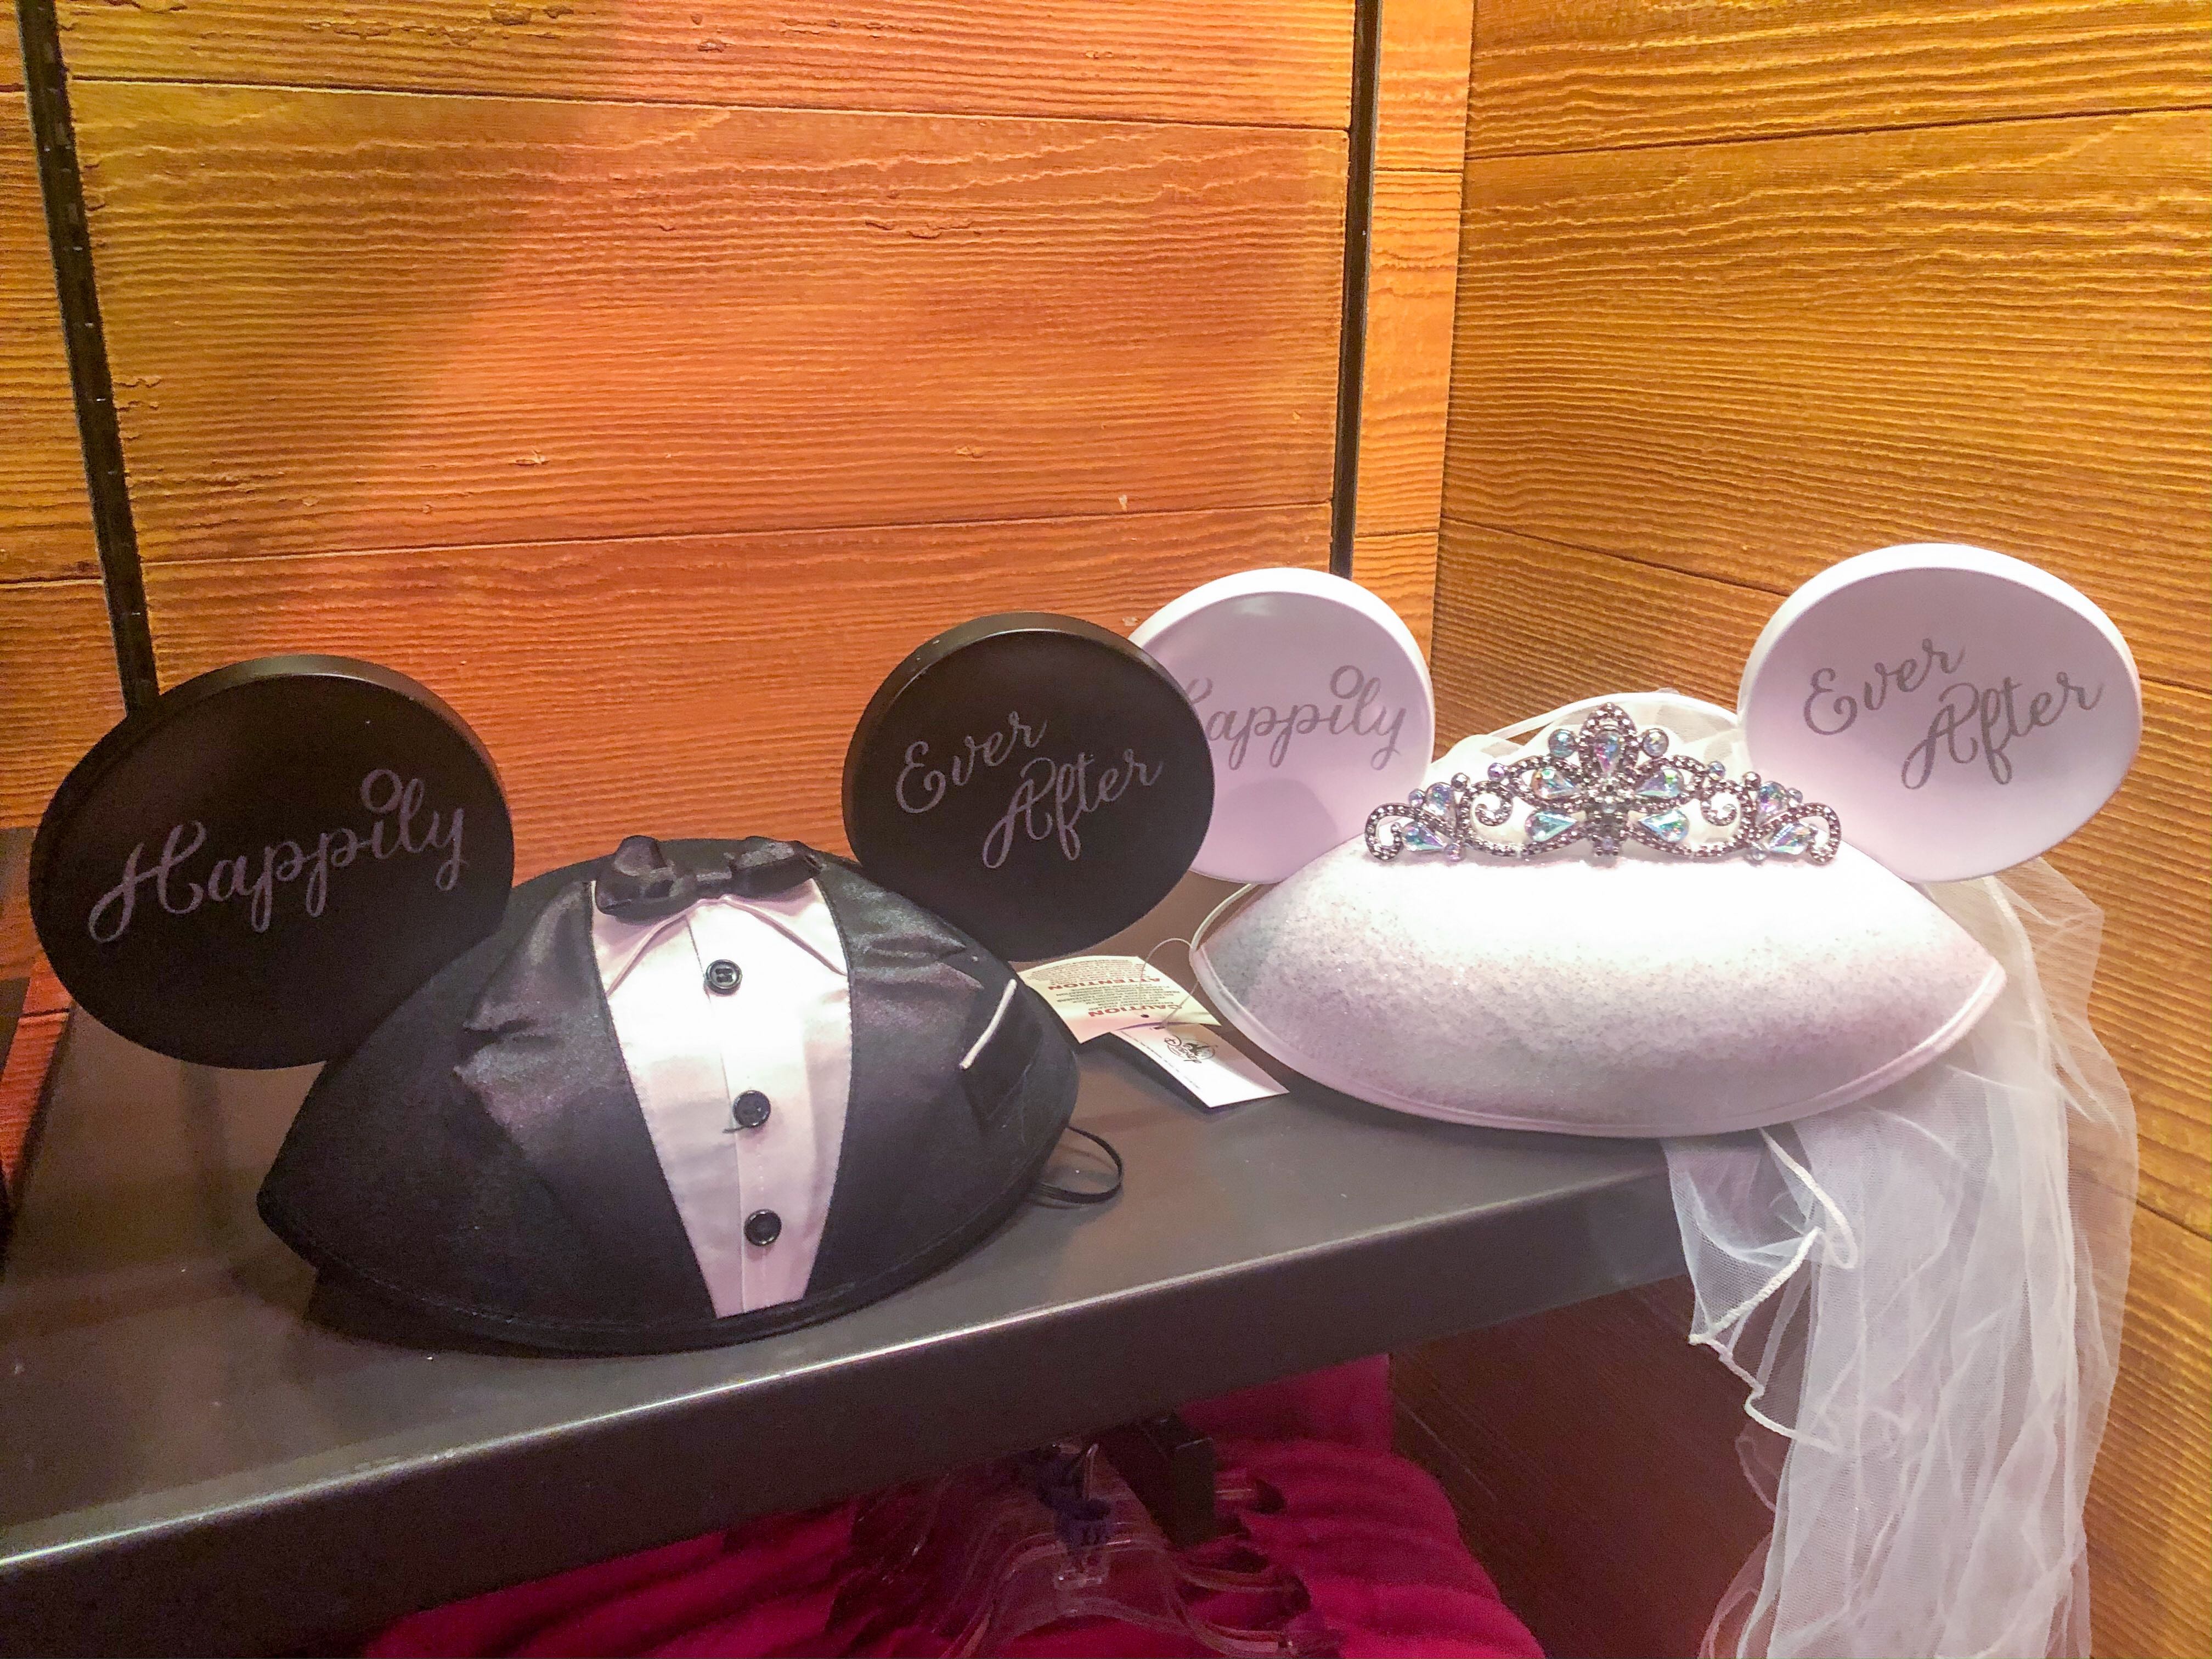 PHOTOS Say "I Do" to the Newest Bride and Groom Mouse Ear